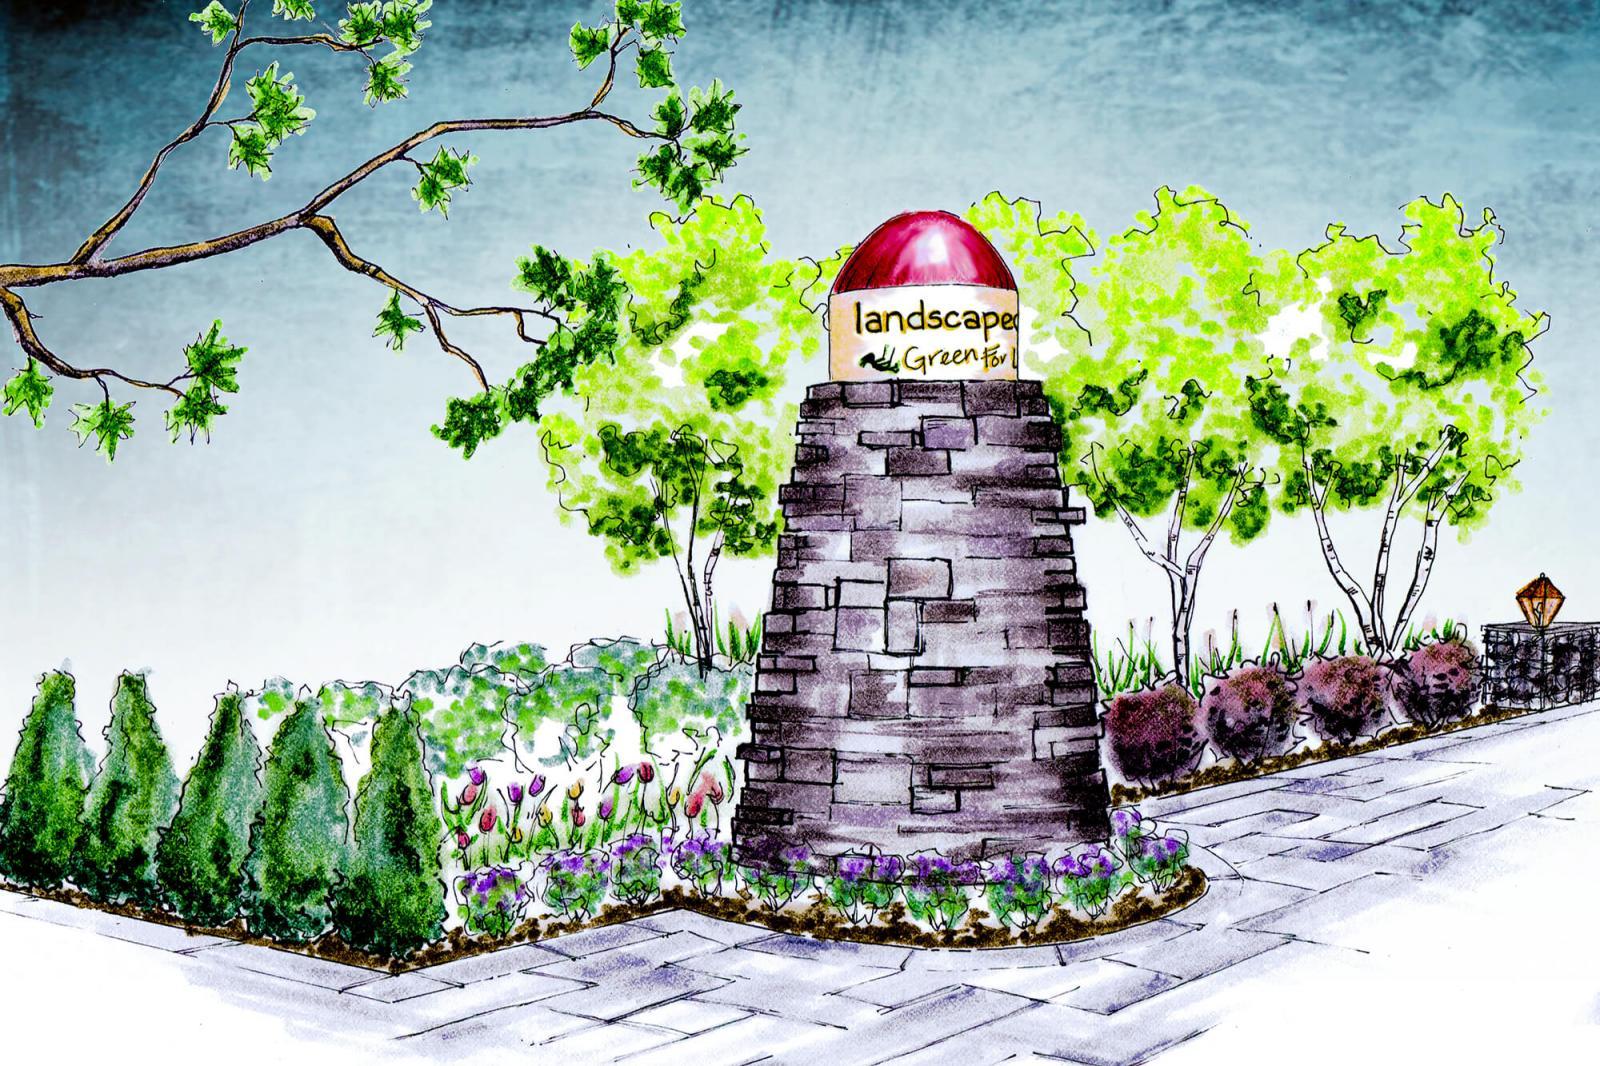 A dry stone lighthouse will be one of the main attractions at this year’s LO garden.